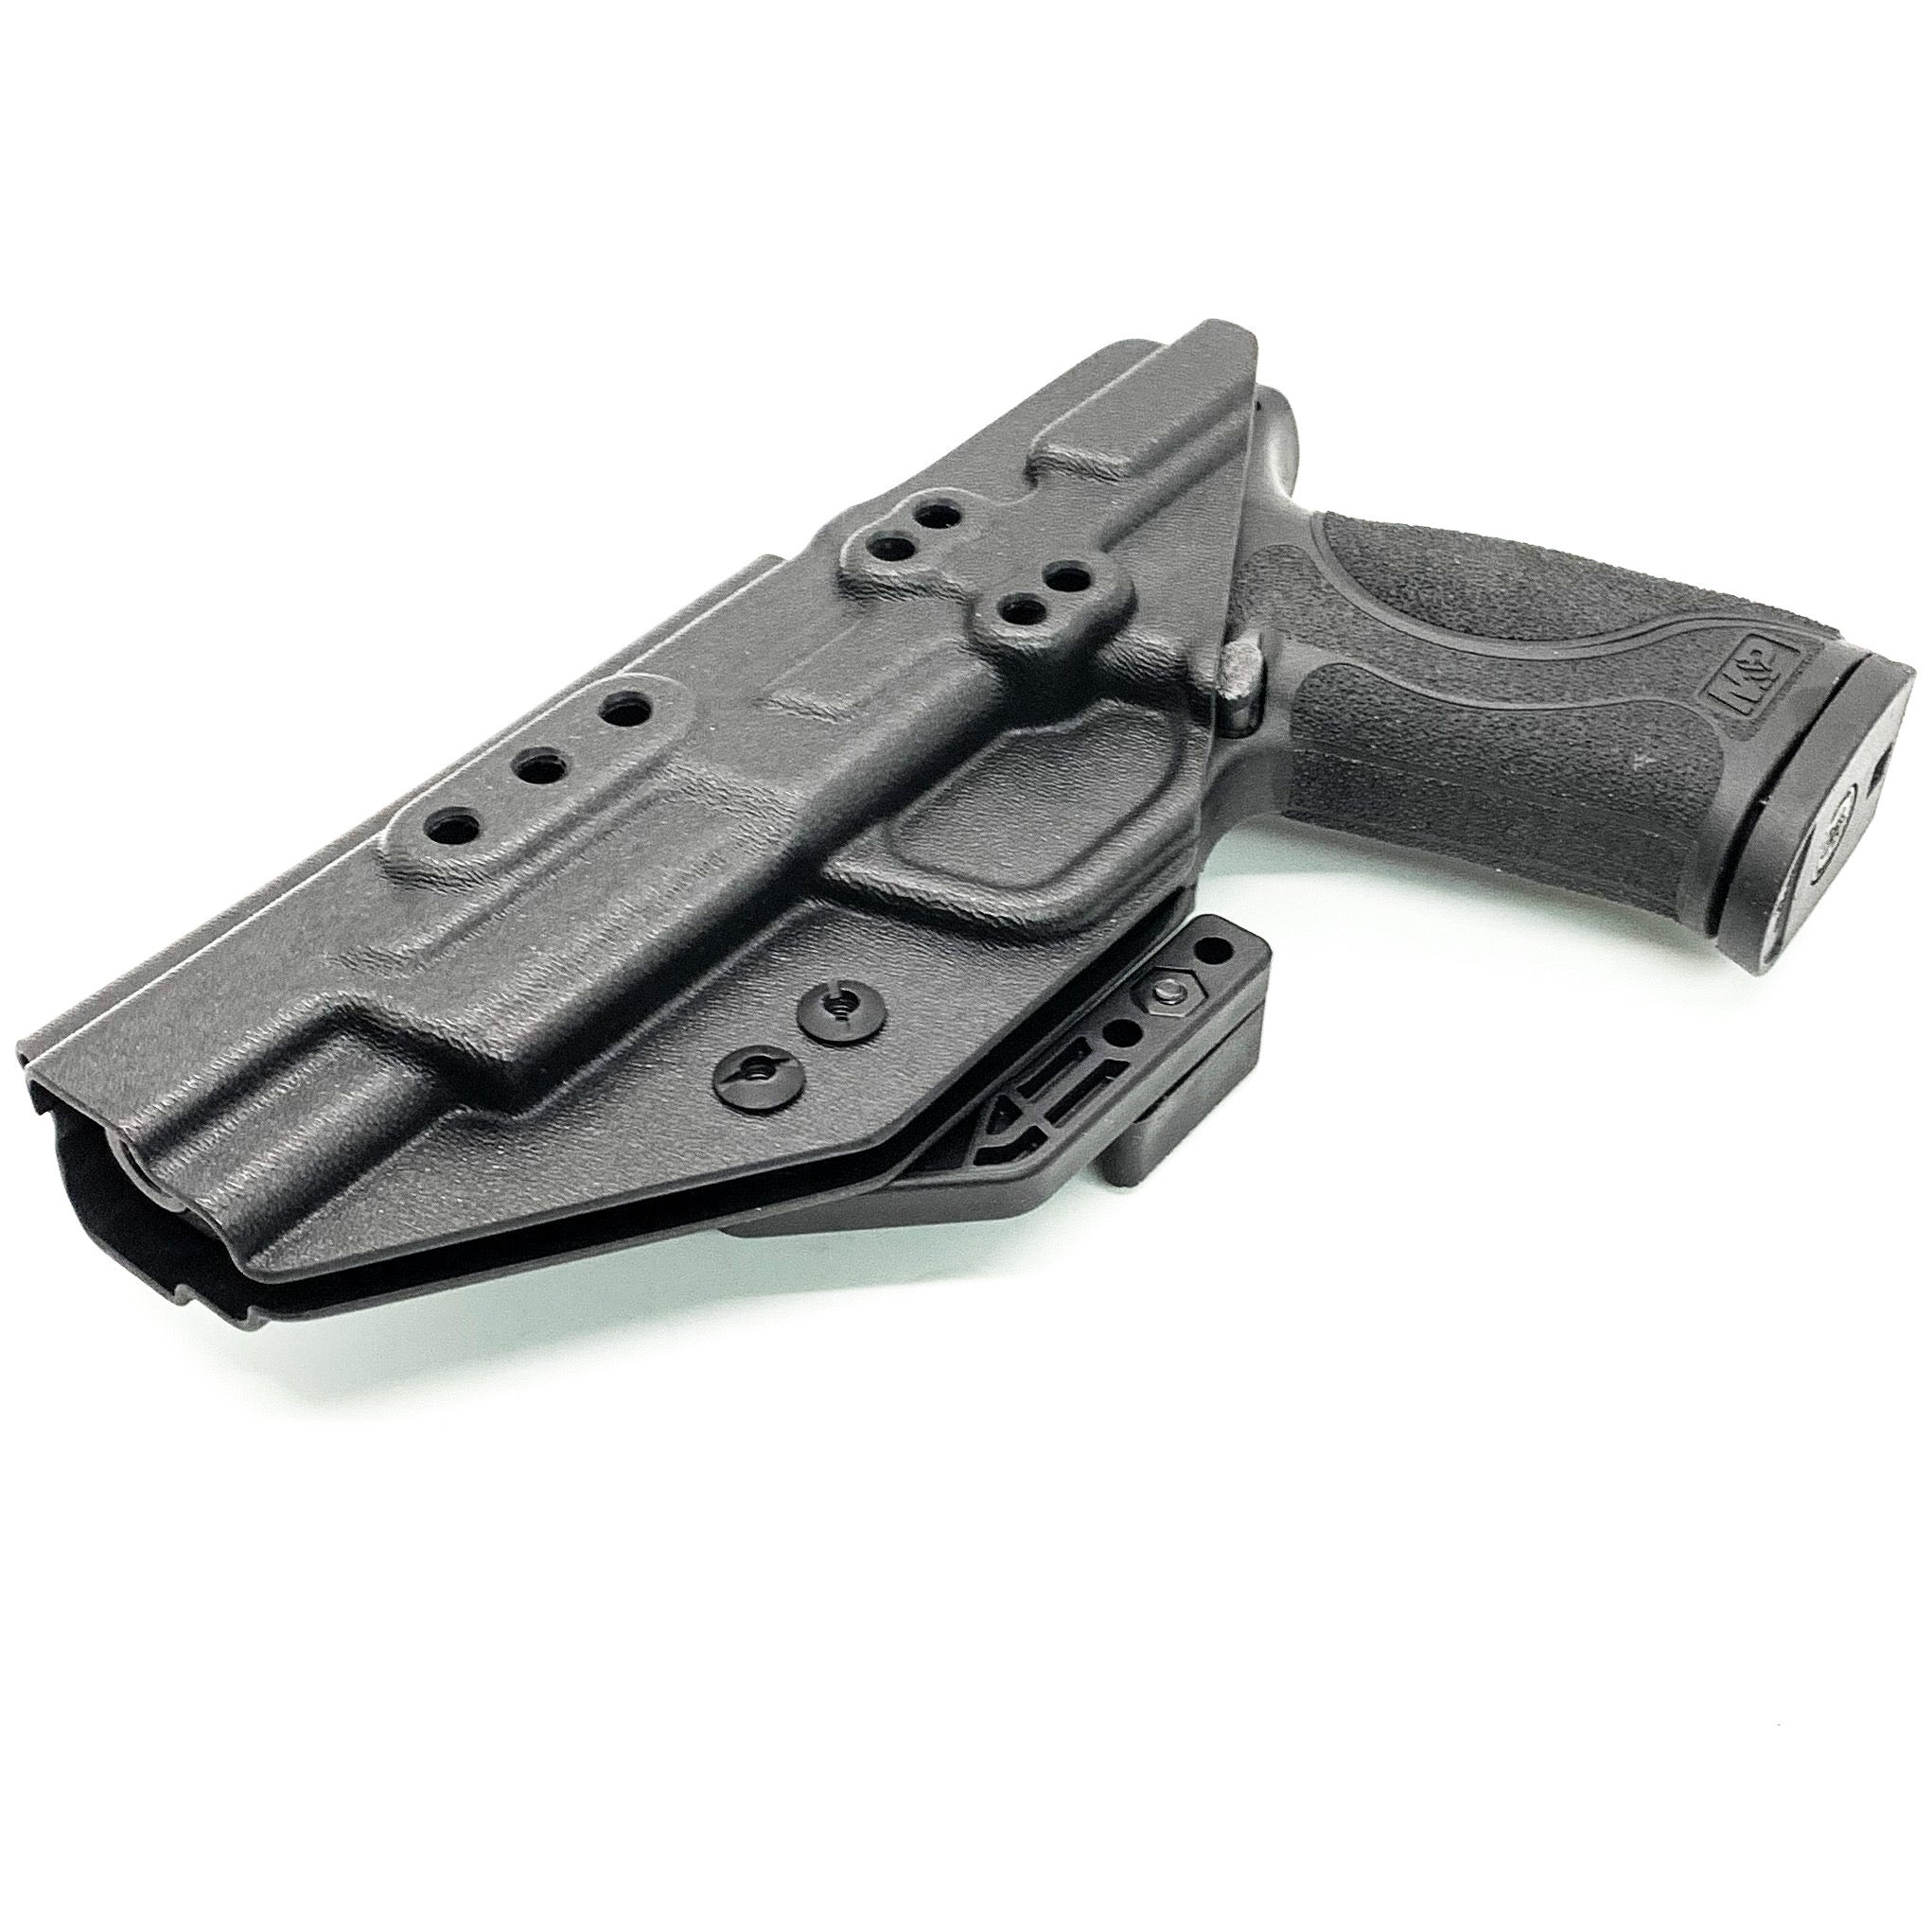 Inside Waistband Kydex Taco Holster designed to fit the Smith and Wesson M&P M2.0 pistol with thumb safety. The holster is designed to fit the 5", 4.25" & 4" barrel lengths.  Full sweat guard, adjustable retention, profiled for a red dot sight. Proudly made in the USA for veterans and law enforcement. 